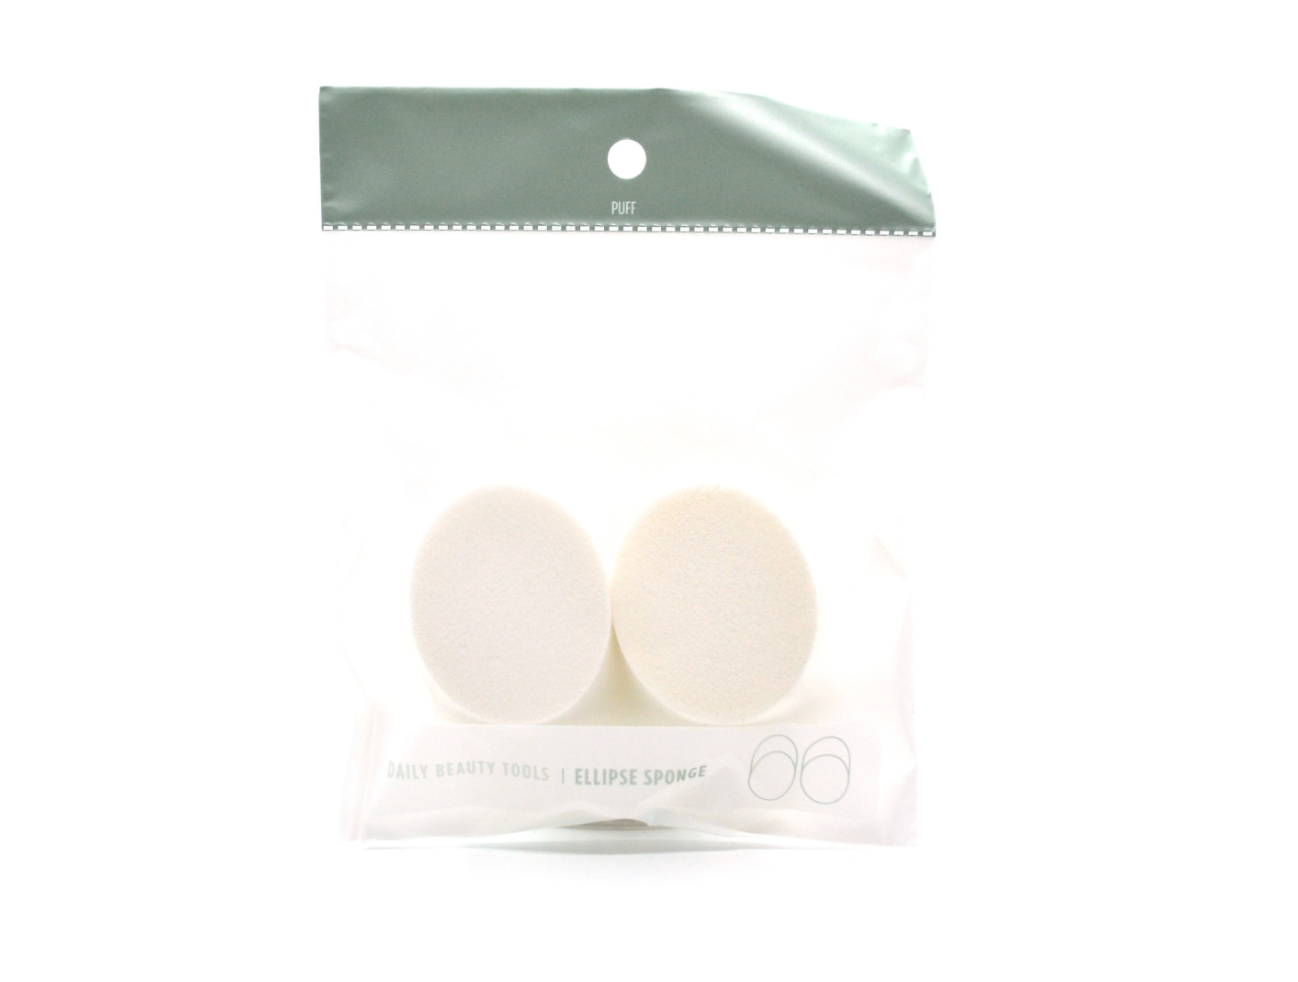 Daily Beauty Tools Ellipse Puff